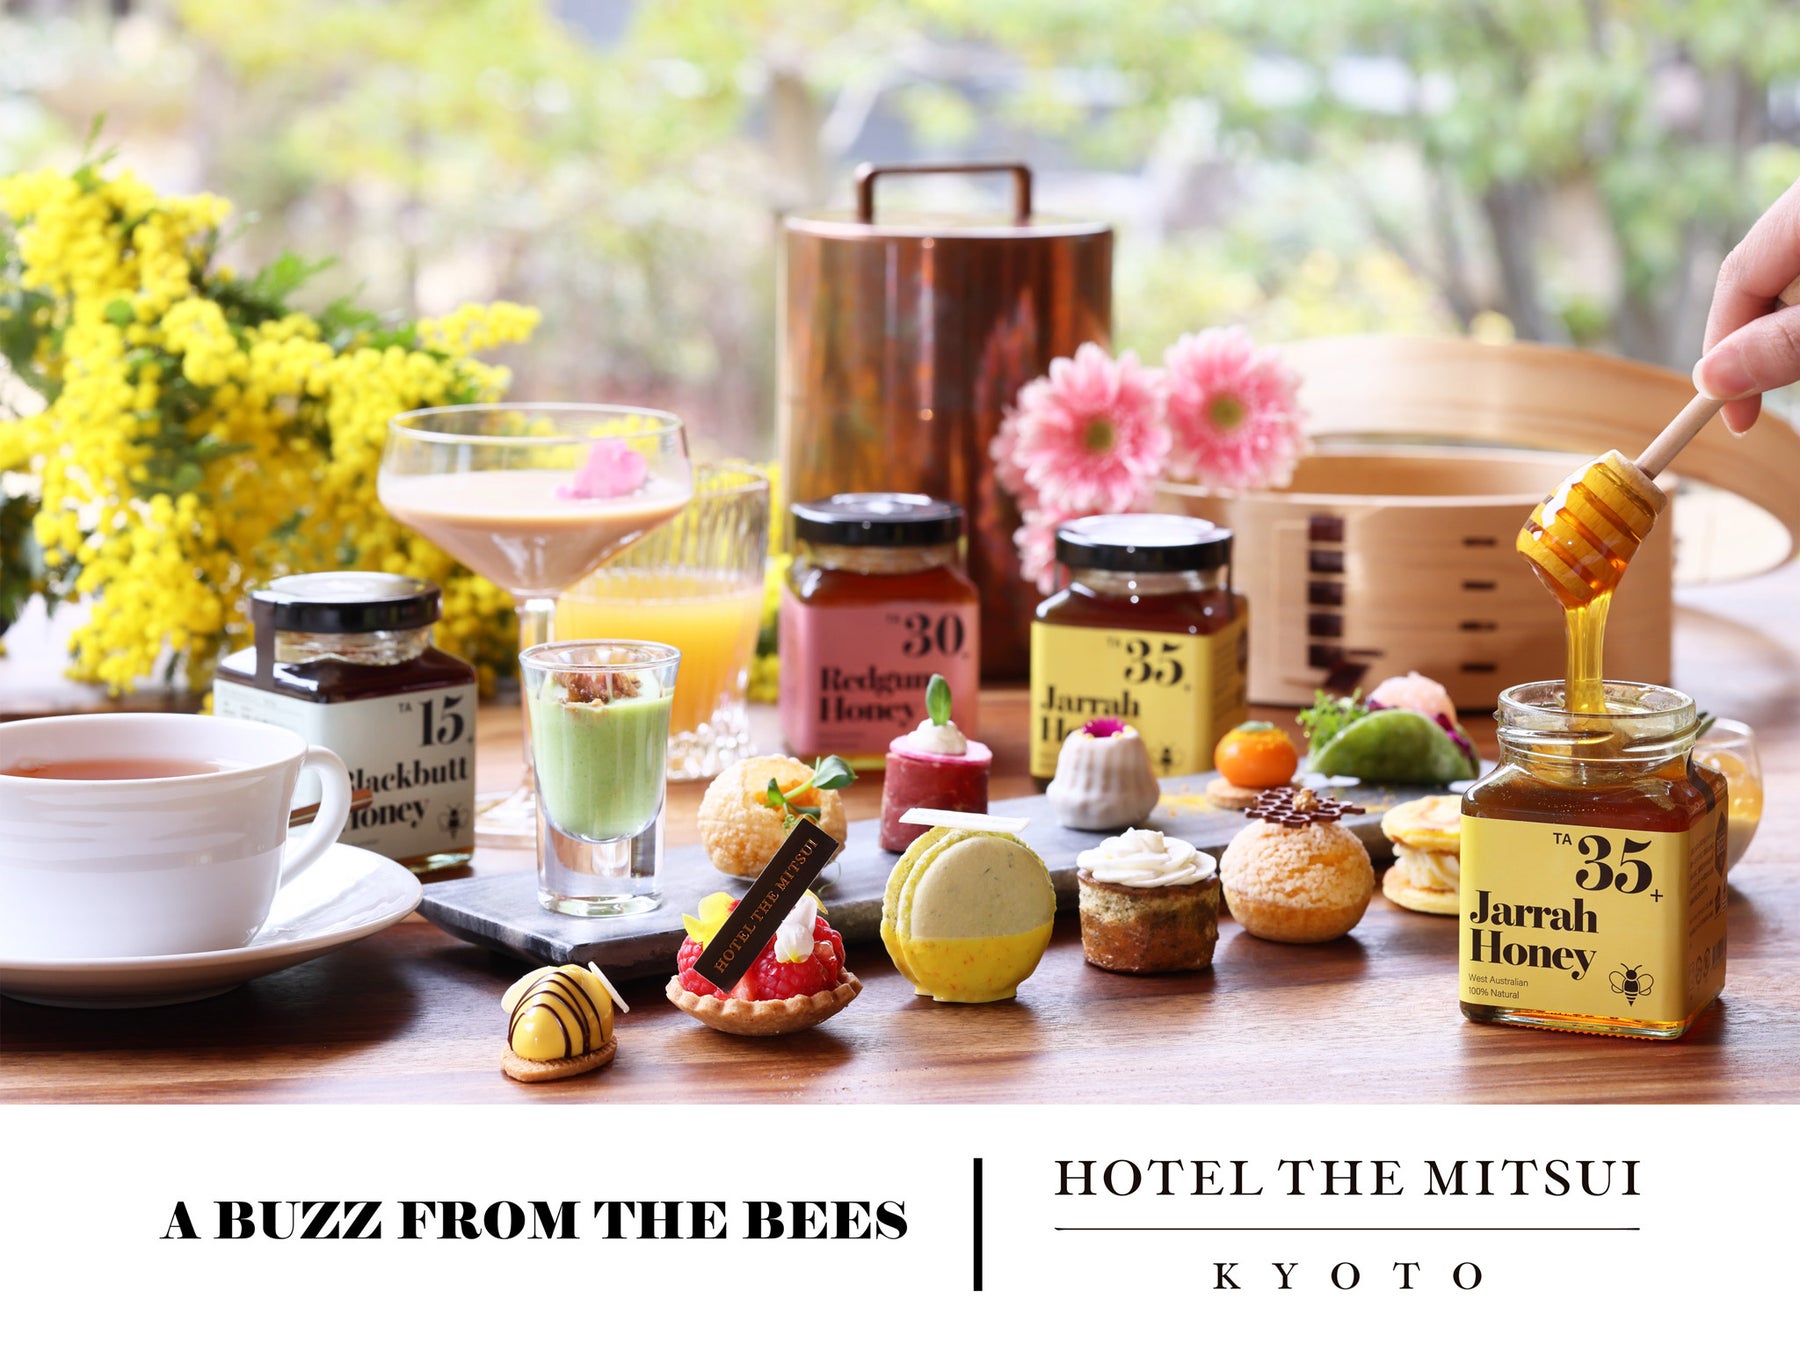 A BUZZ FROM THE BEES × HOTEL THE MITSUI KYOTO大好評の「“奇跡のはちみつ” アフタヌーンティー」が今年も登場